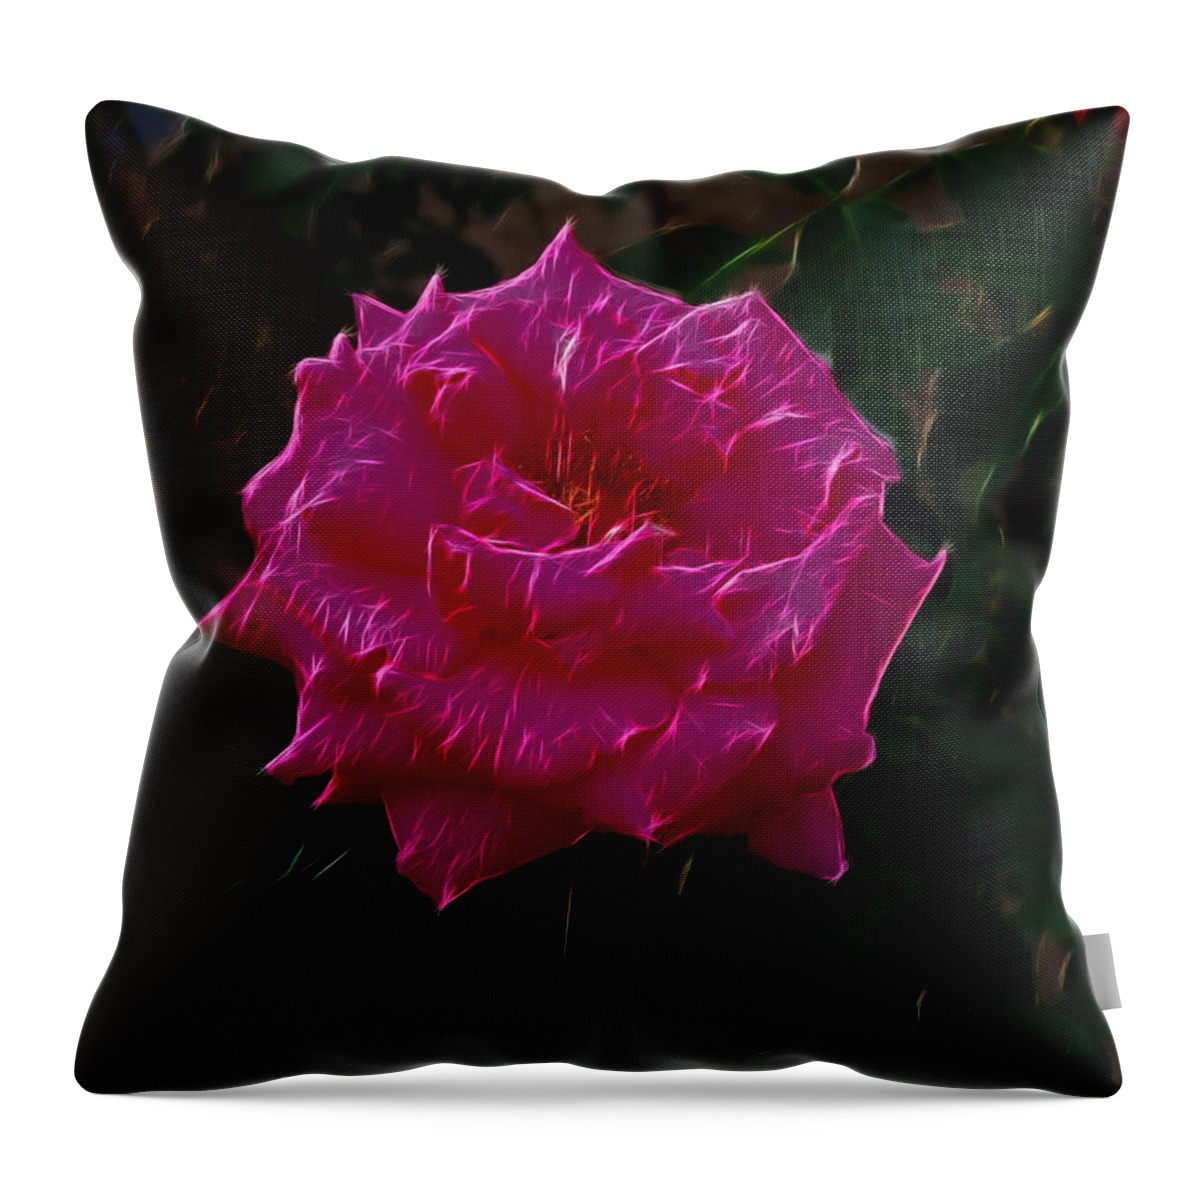 Rose Throw Pillow featuring the digital art Pink Rose Electric by Flees Photos